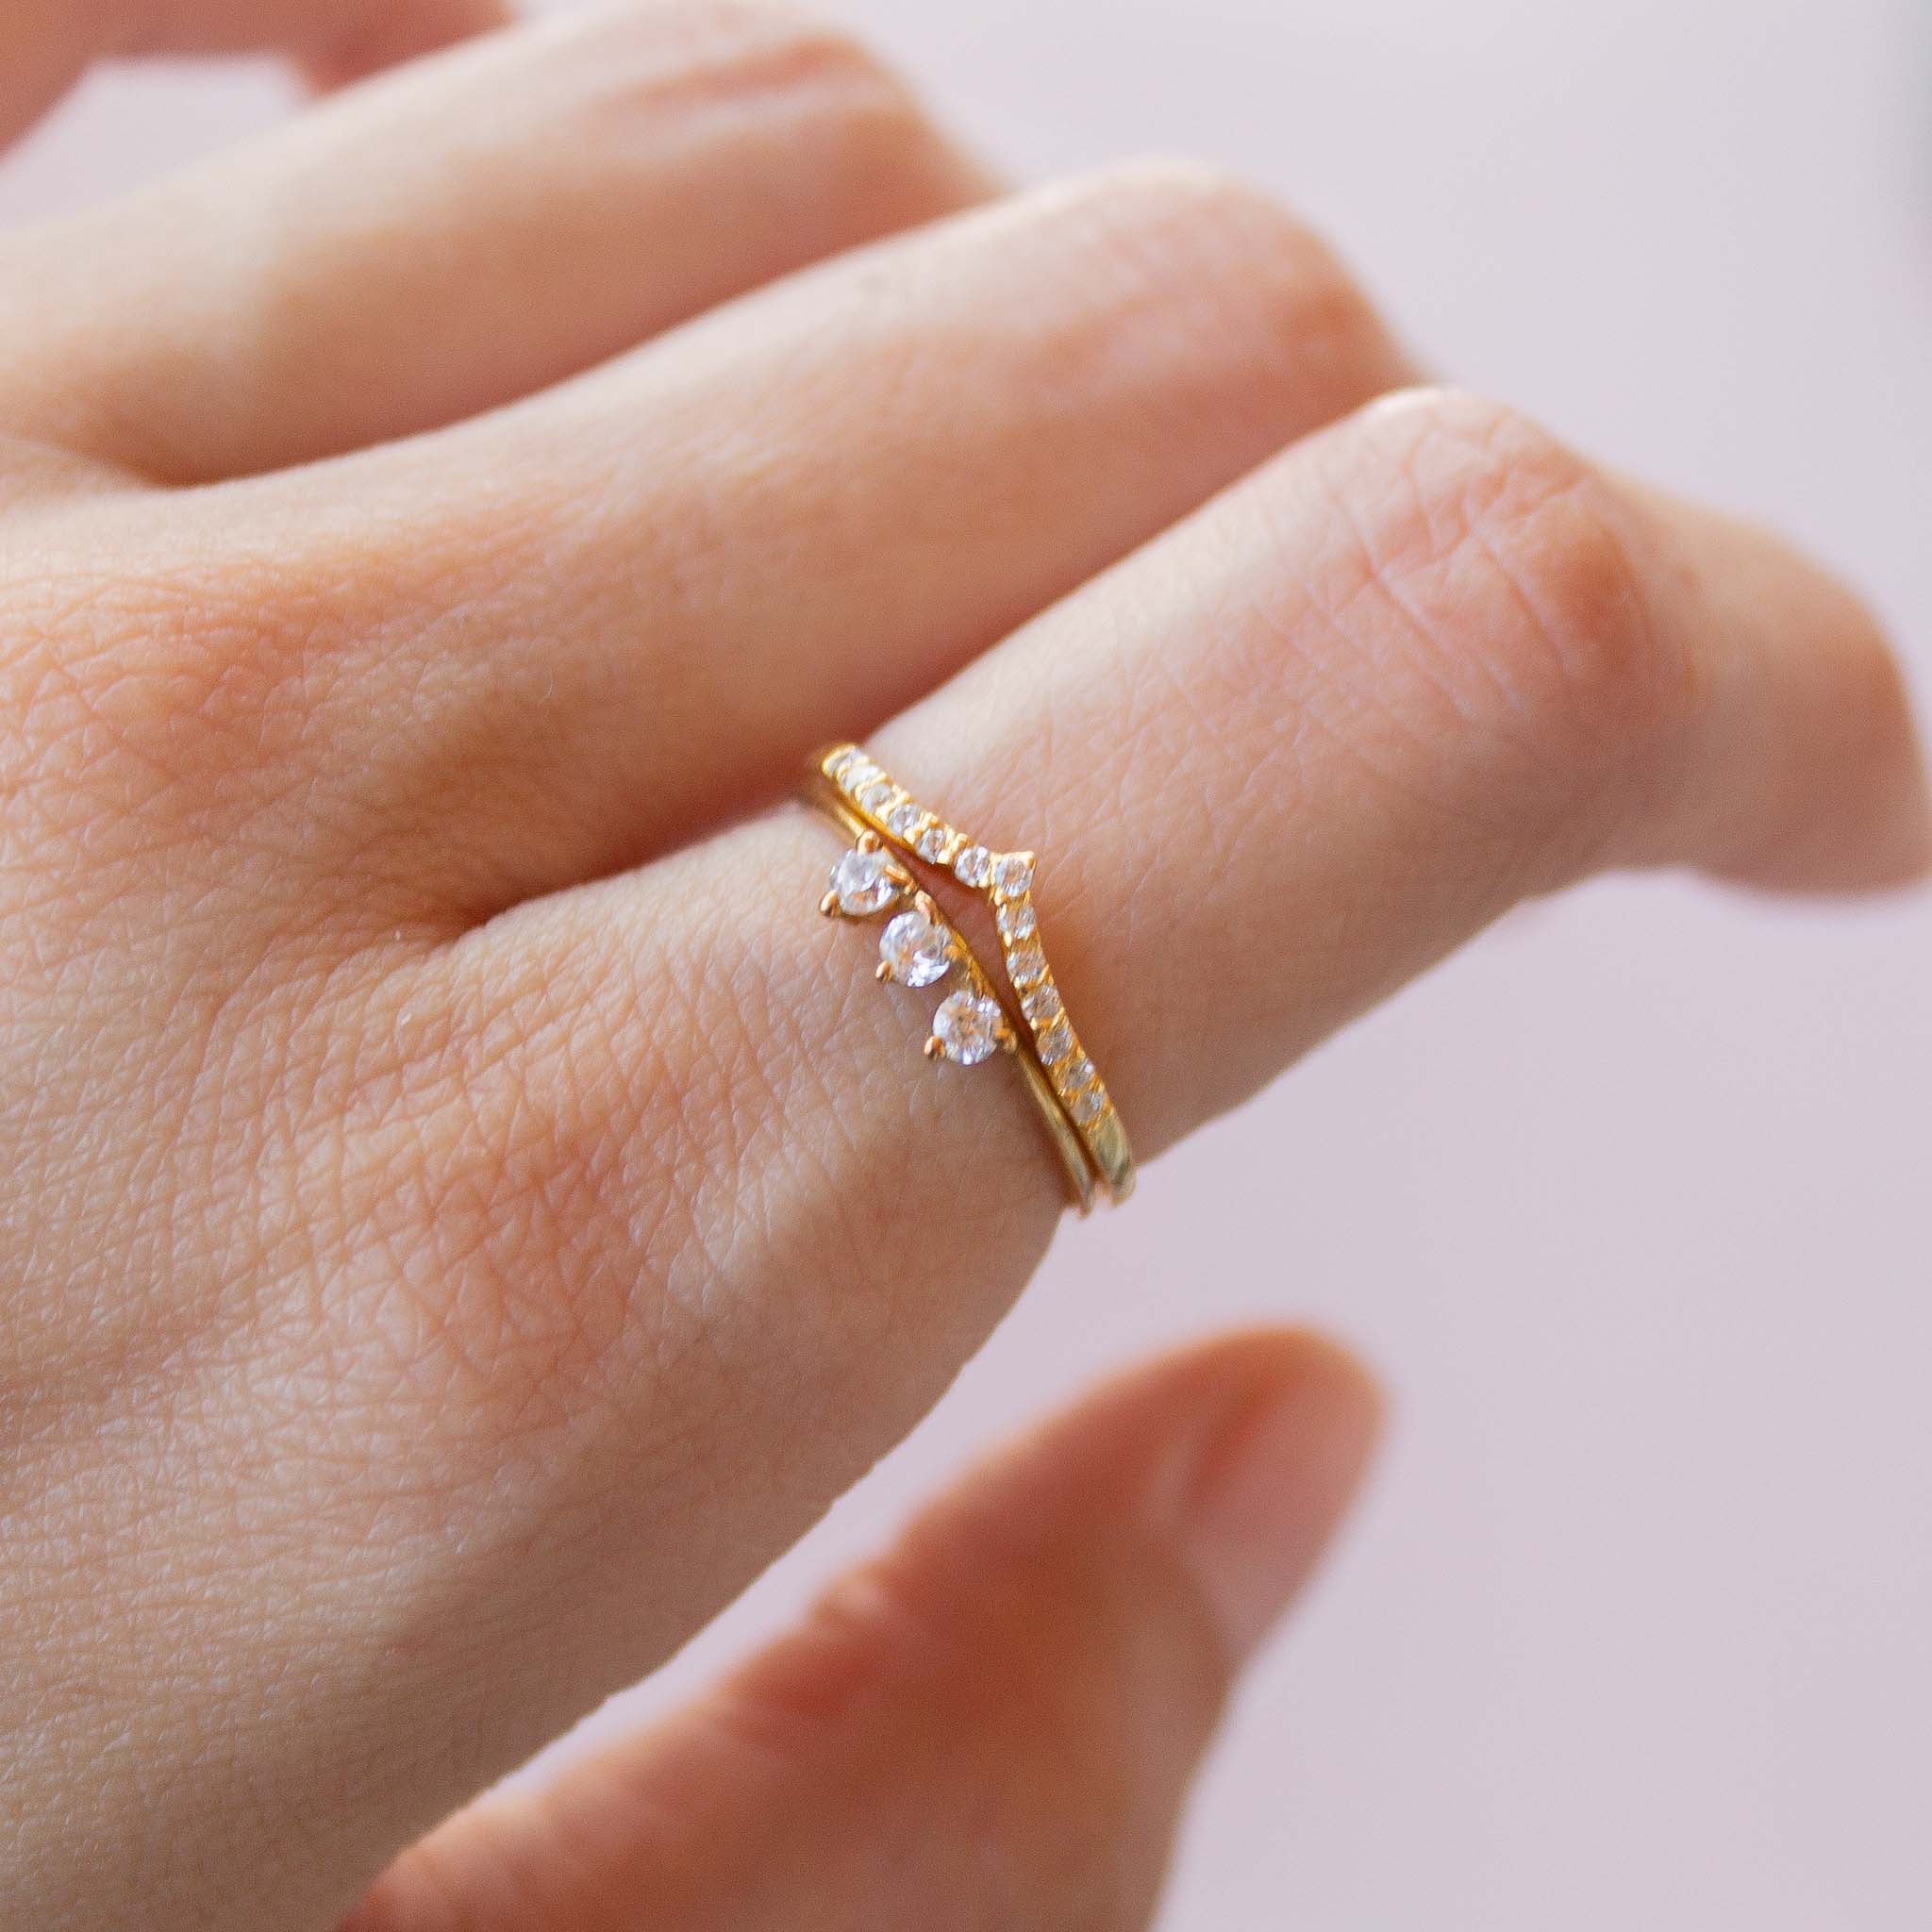 Perfect ring stacking ideas